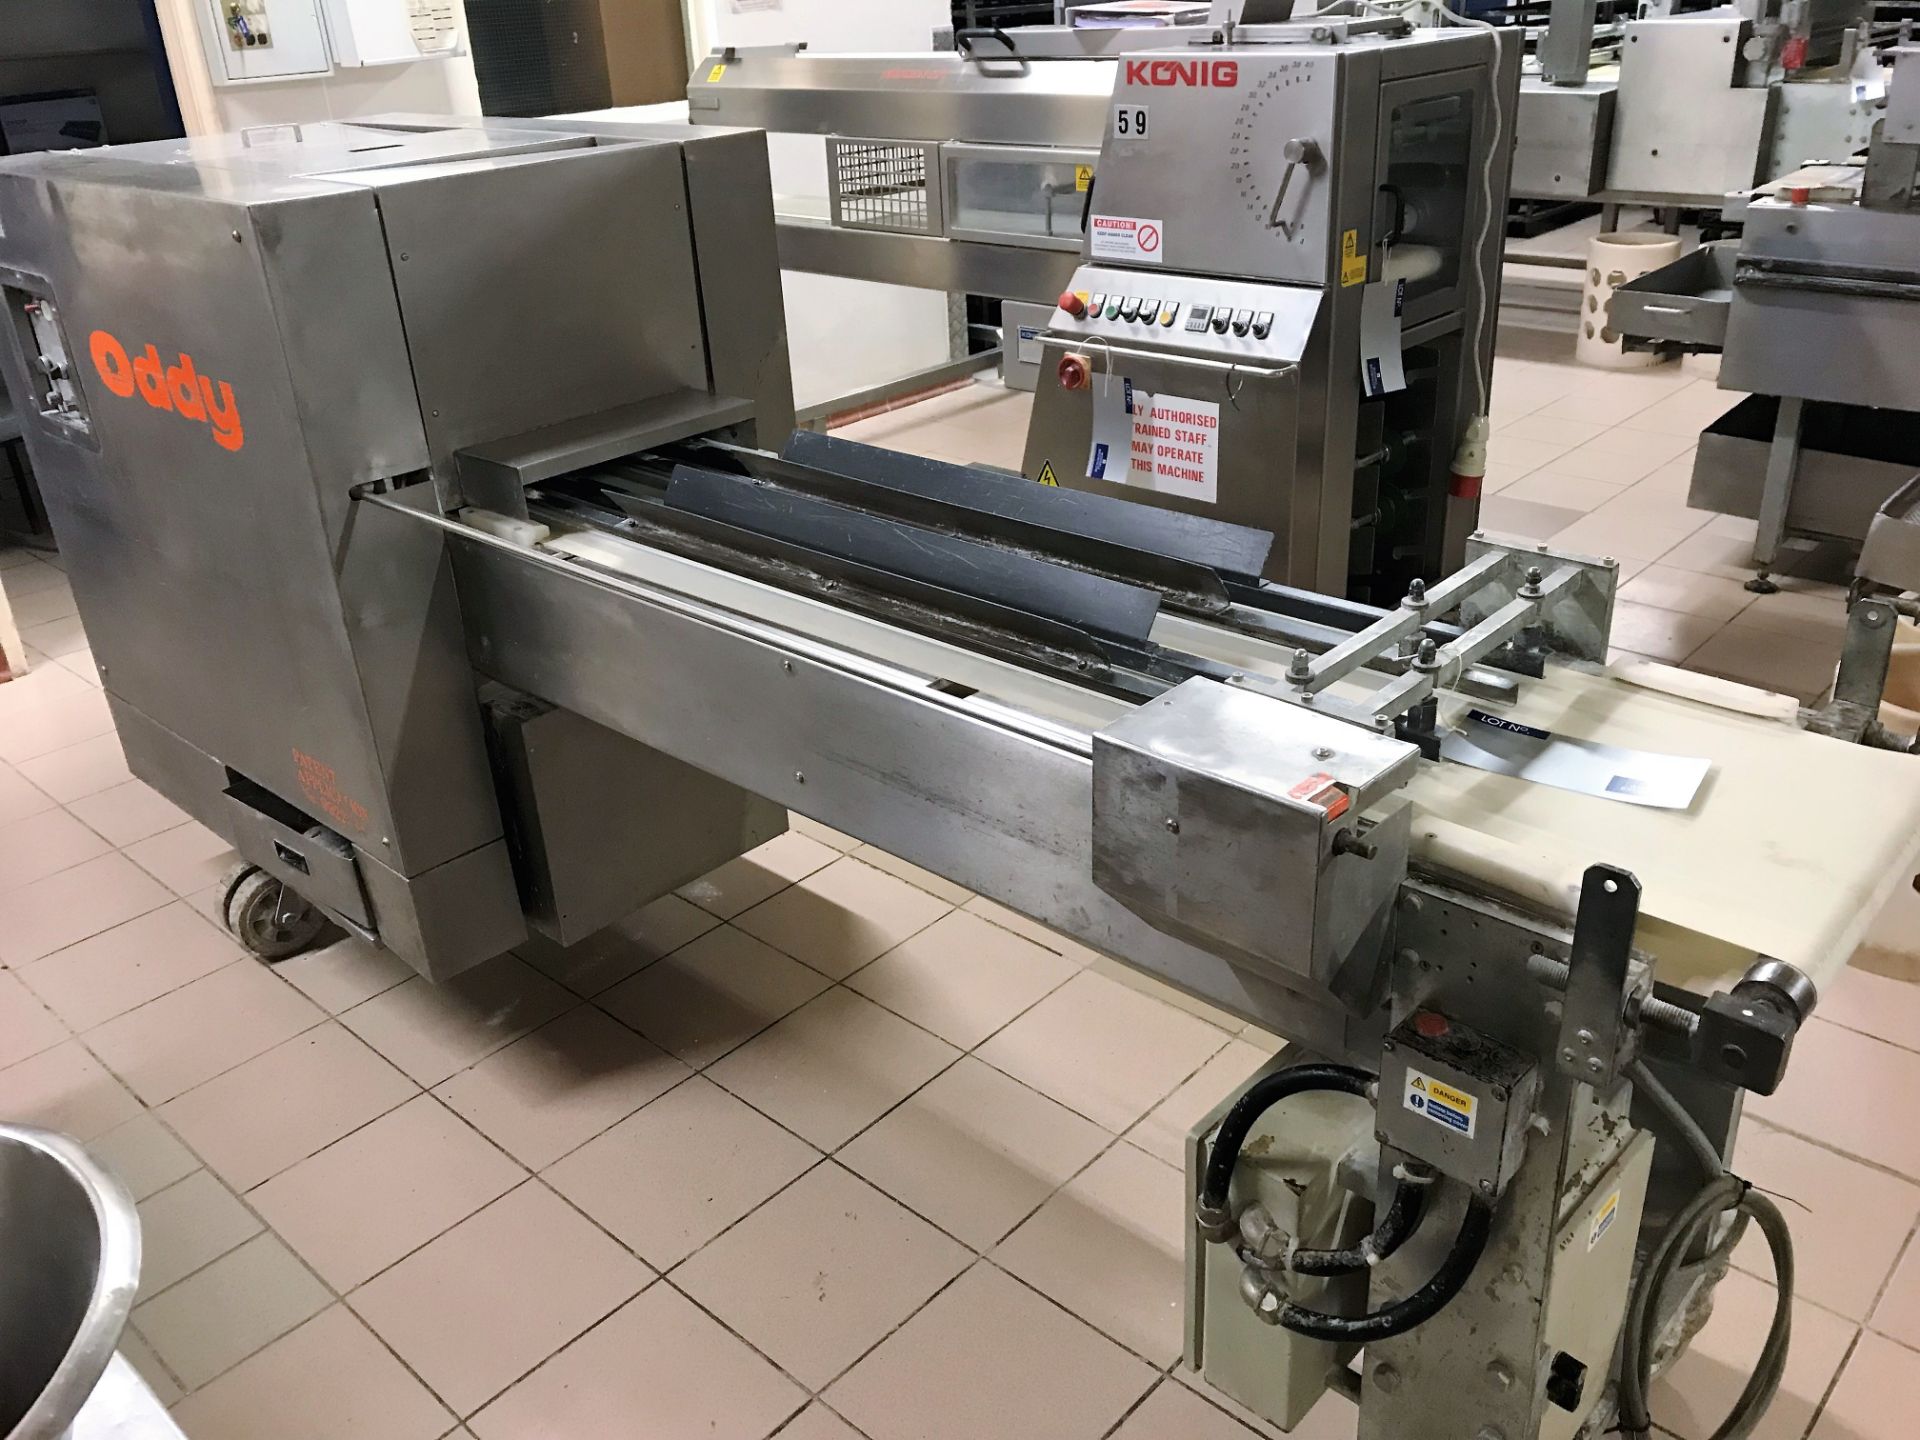 An Oddy Type 55 Mobile Two Row Bread Plaiting Line No.11186 (3ph), 15in x 138in conveyor.